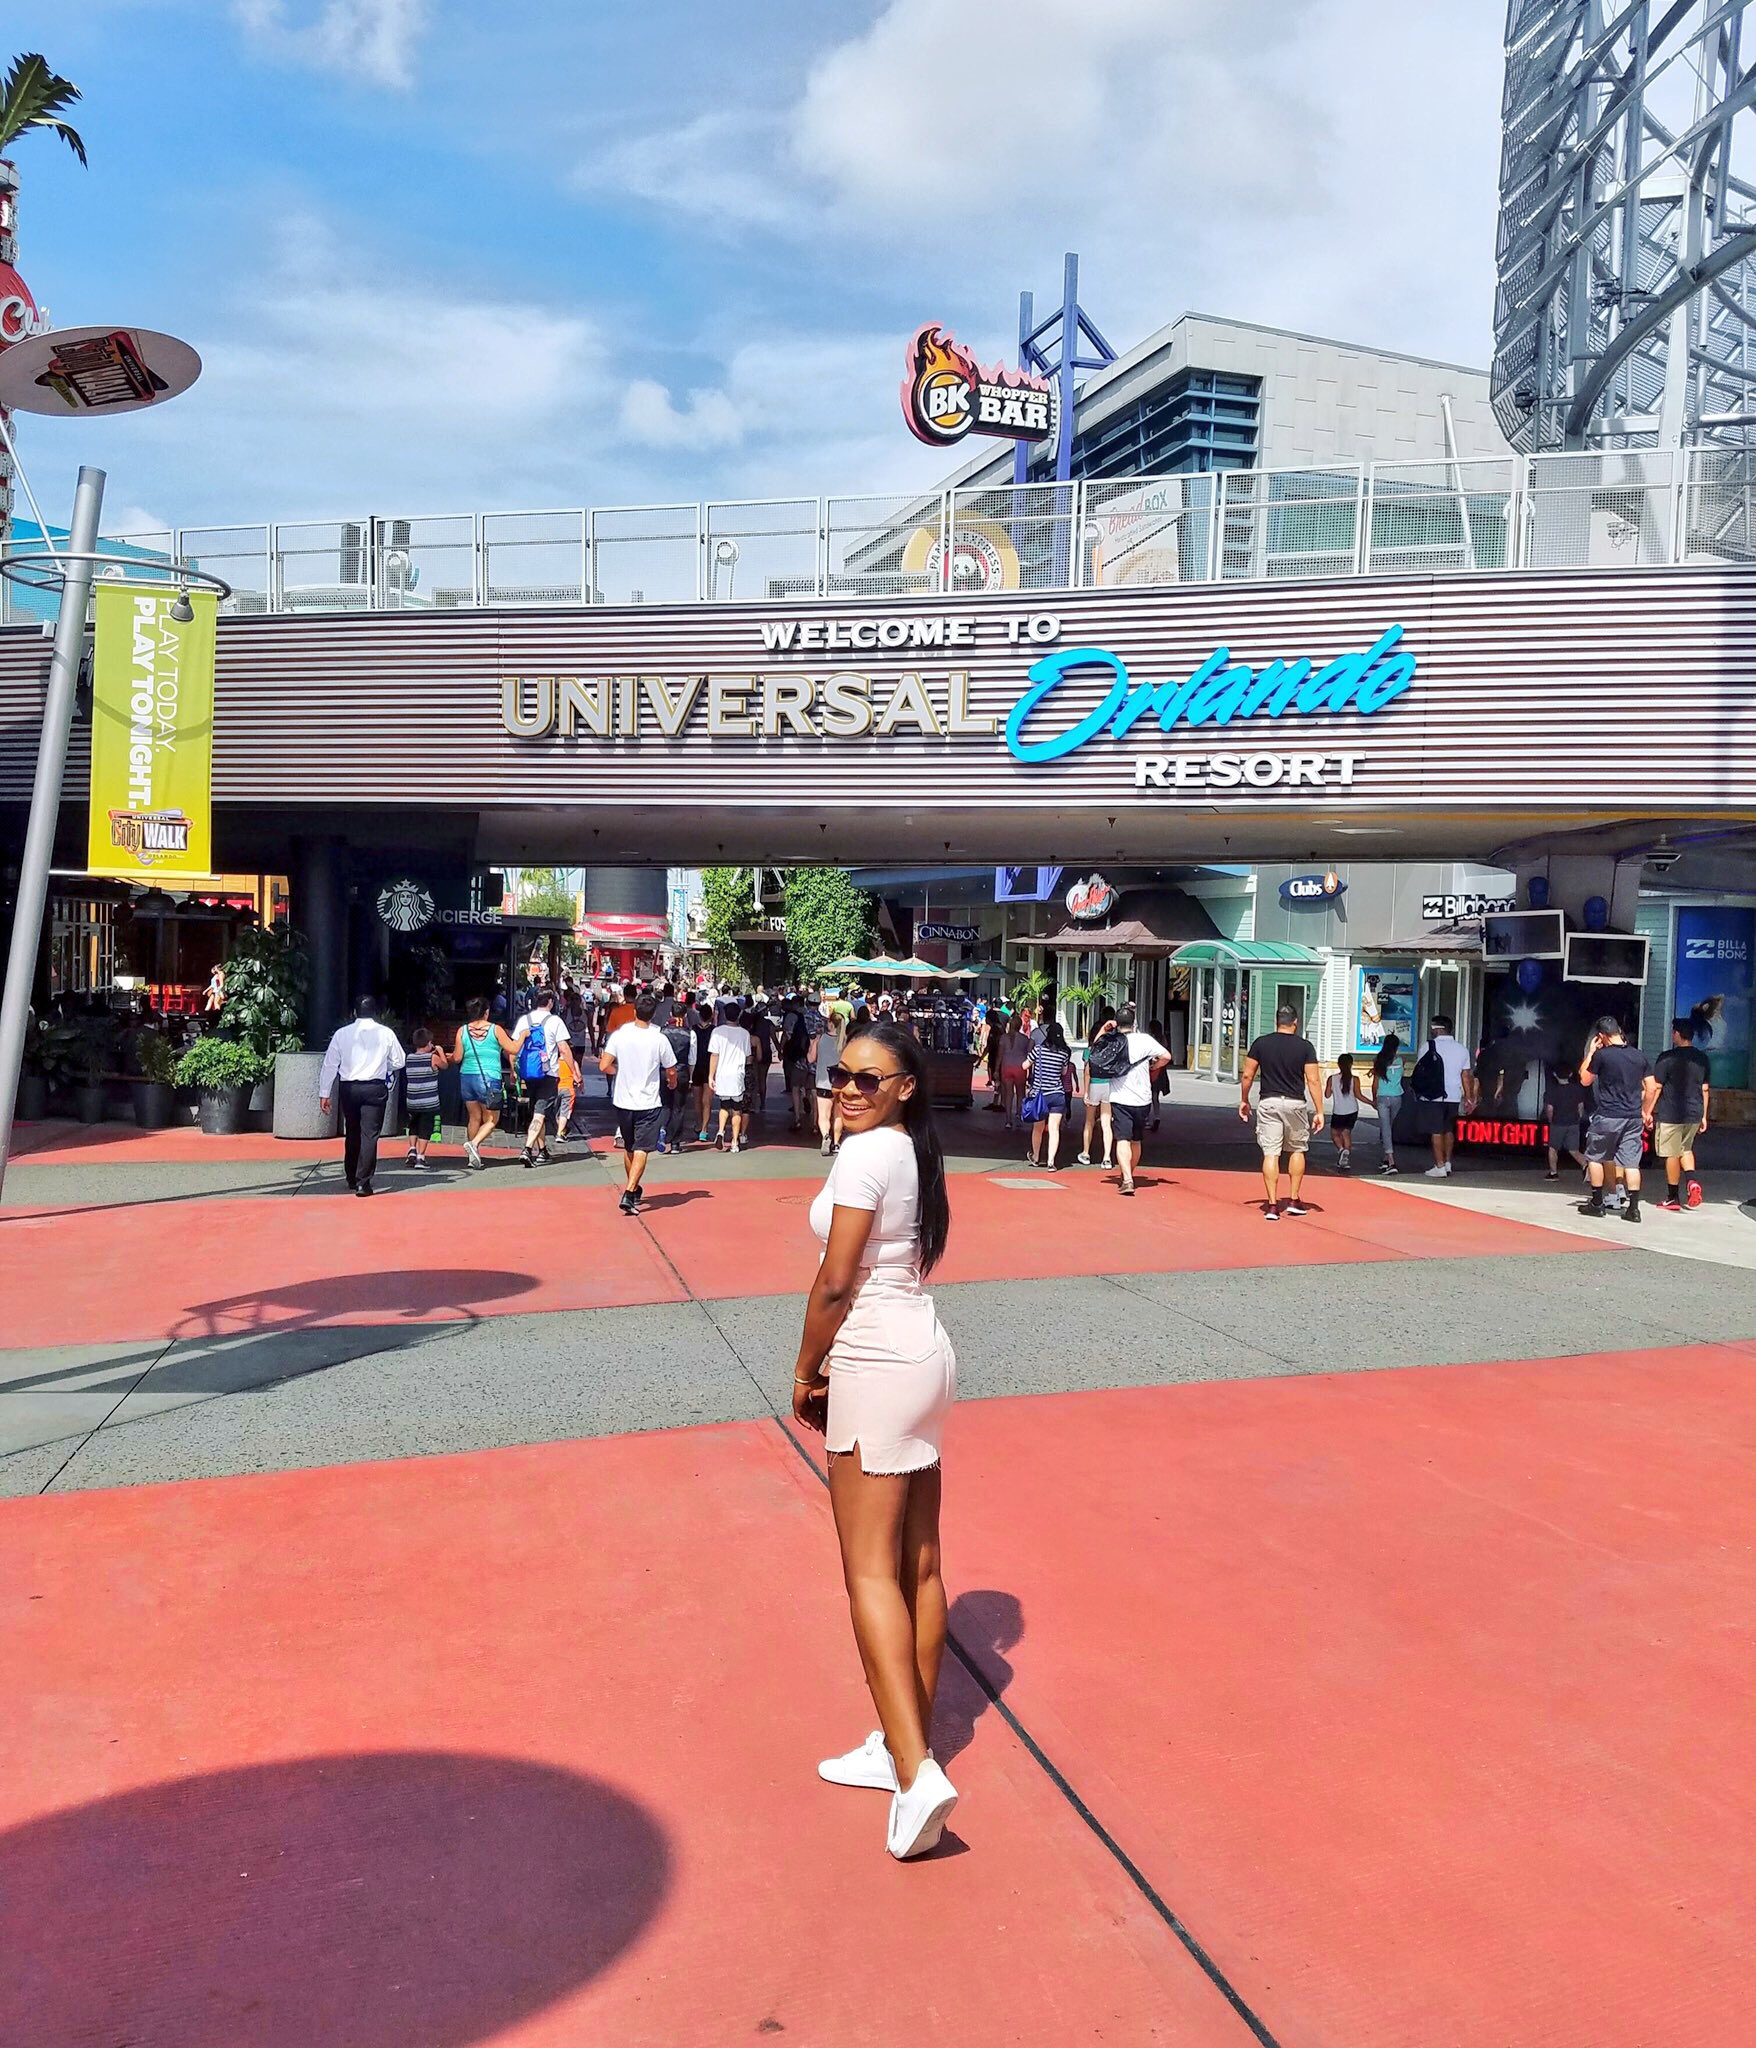 This is the best time to visit Universal Studios Orlando  Universal  studios orlando, Universal studios, Universal vacation